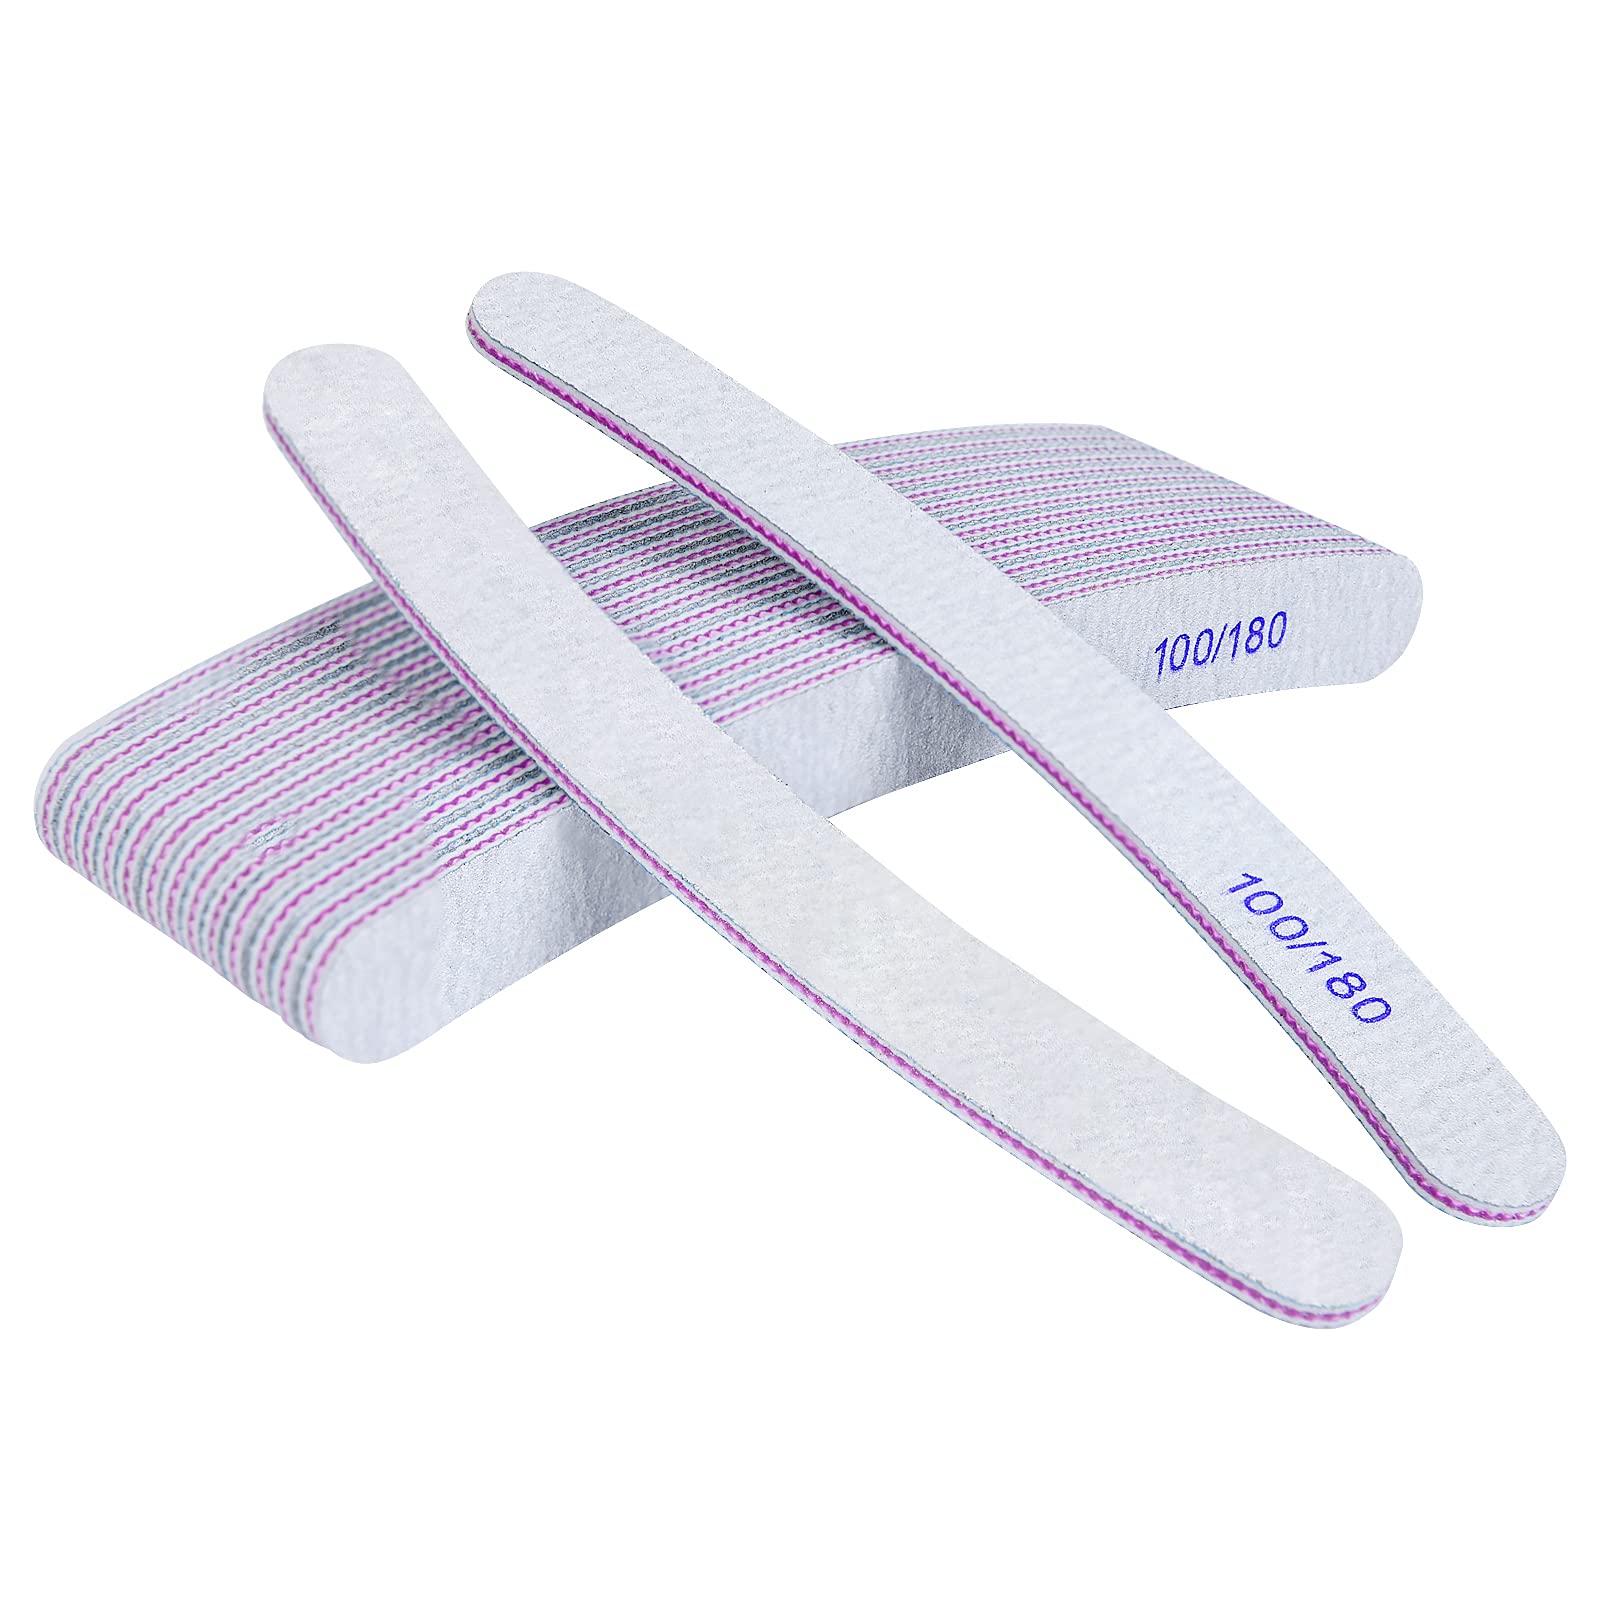 HYGIENIC SINGLE USE 100/180 NAIL FILE 7 INCH – Fanair Cosmetiques